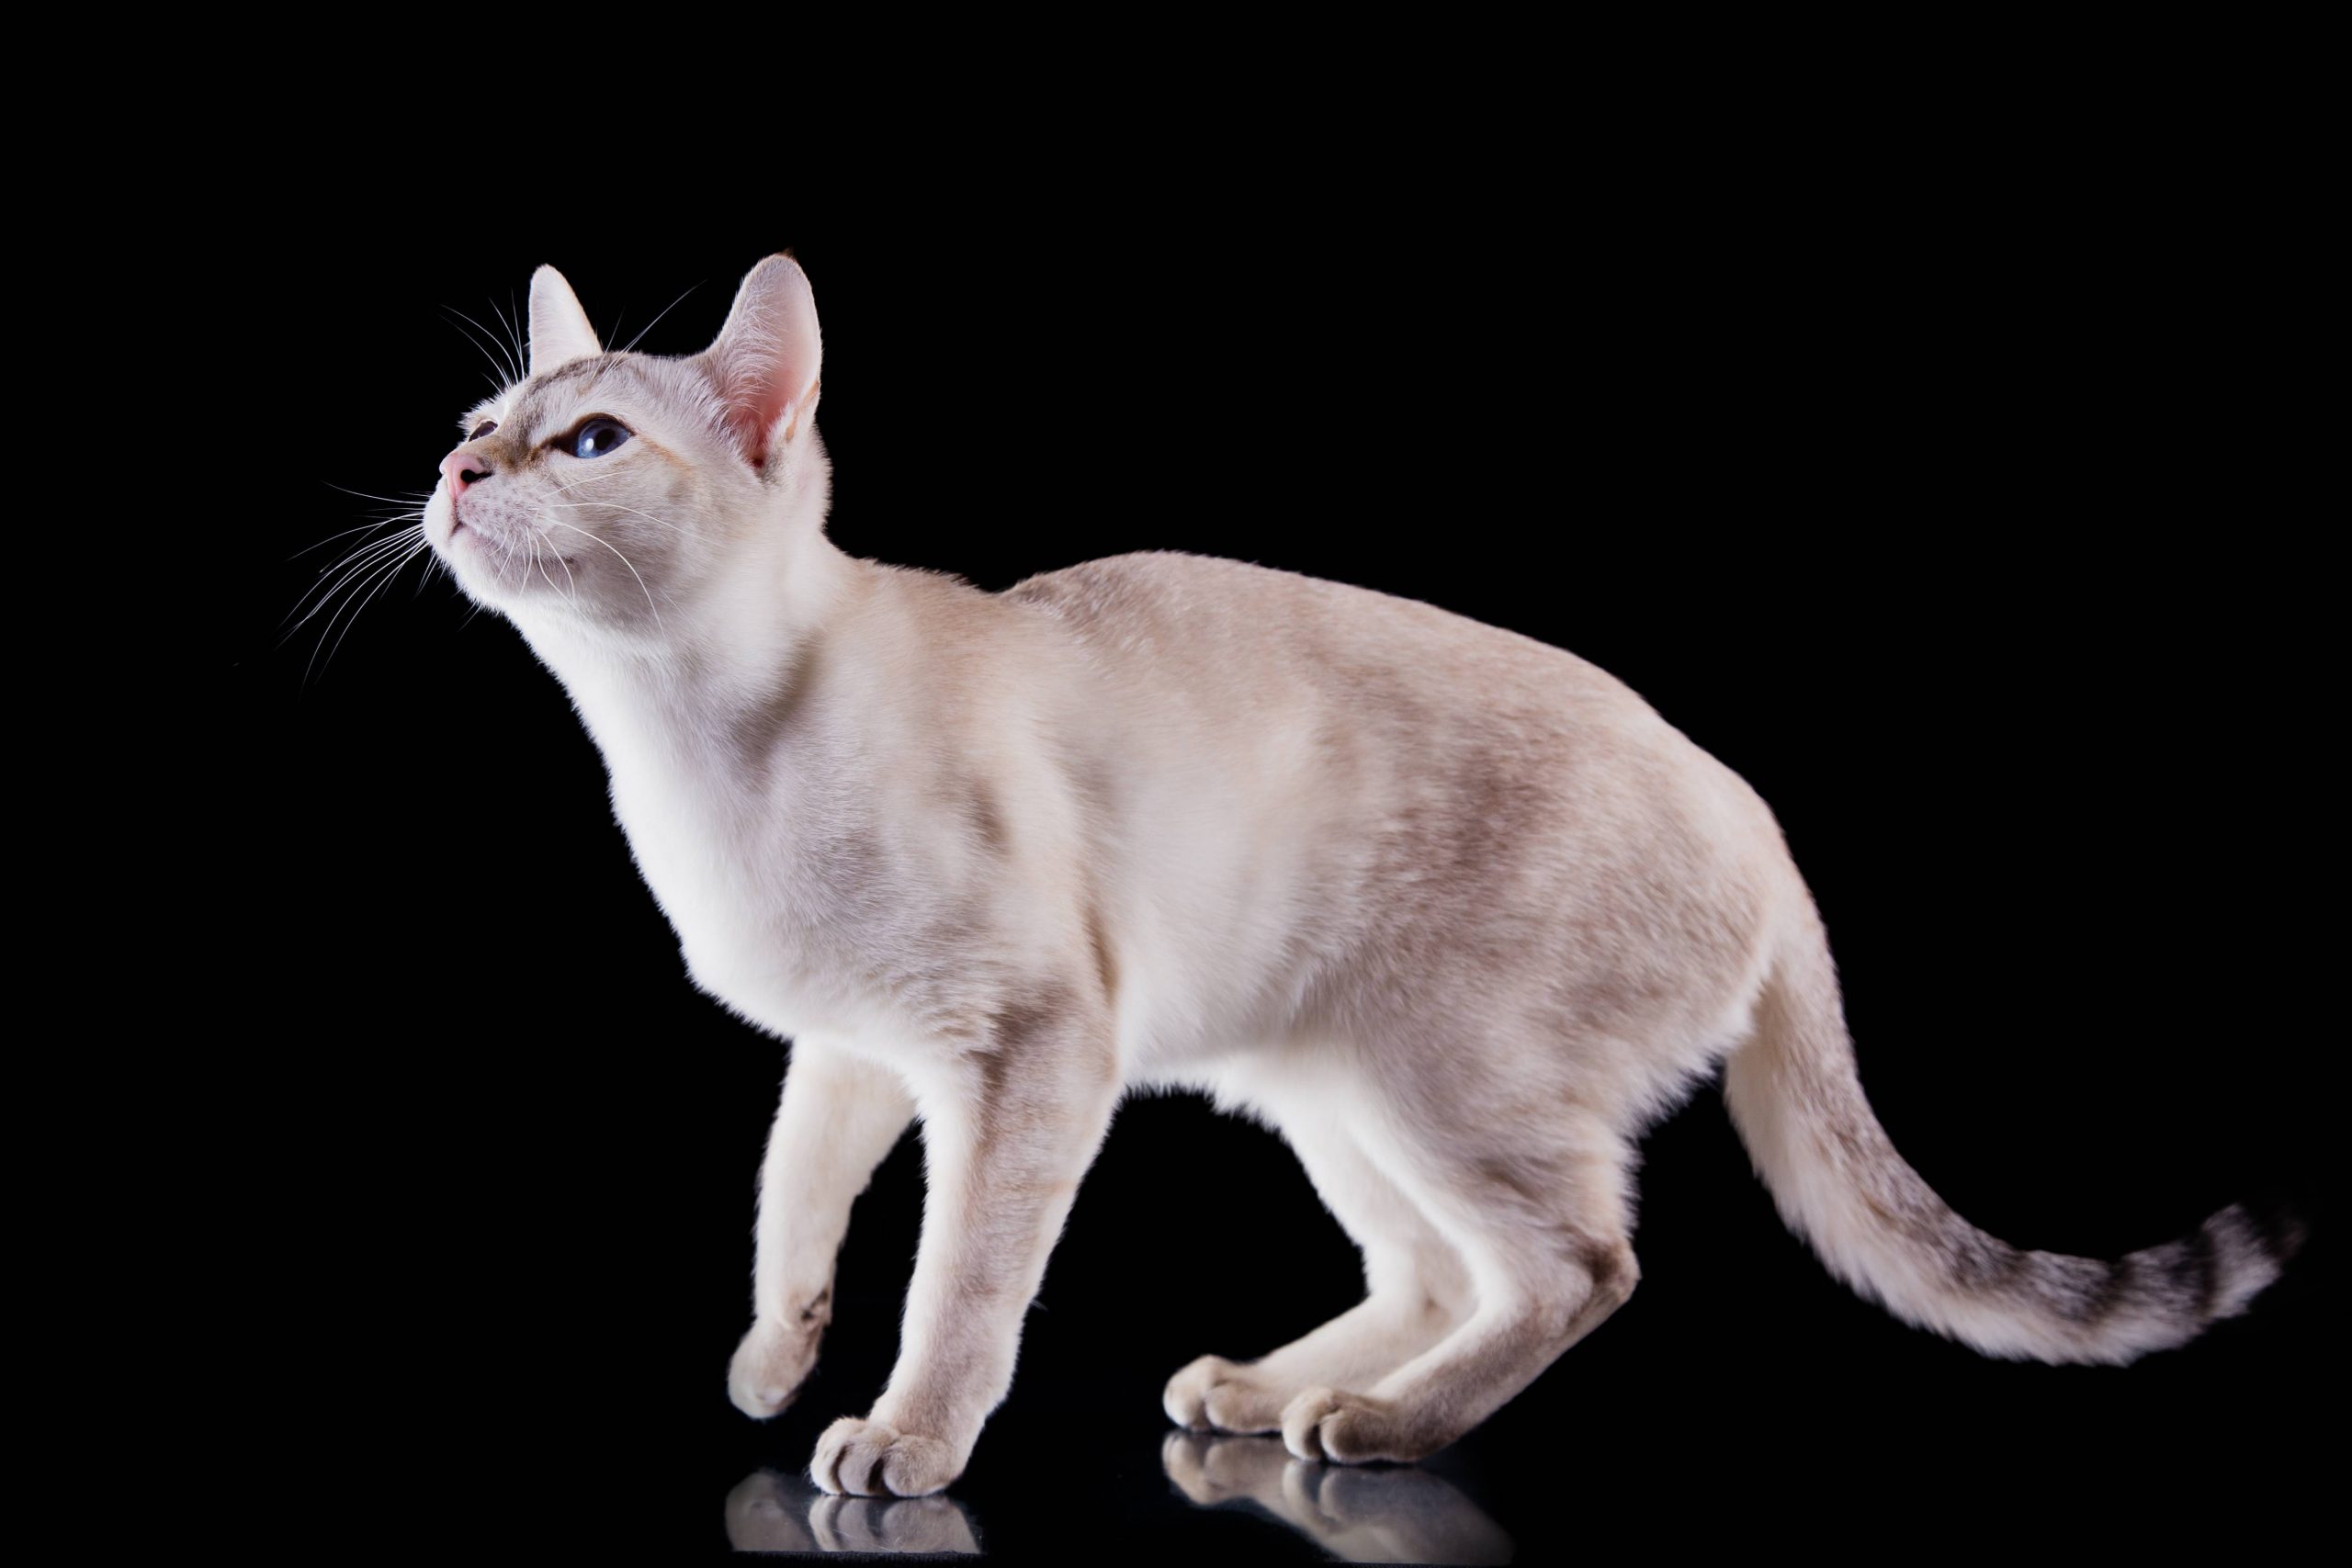 Houston: How to Care For a Tonkinese Cat?